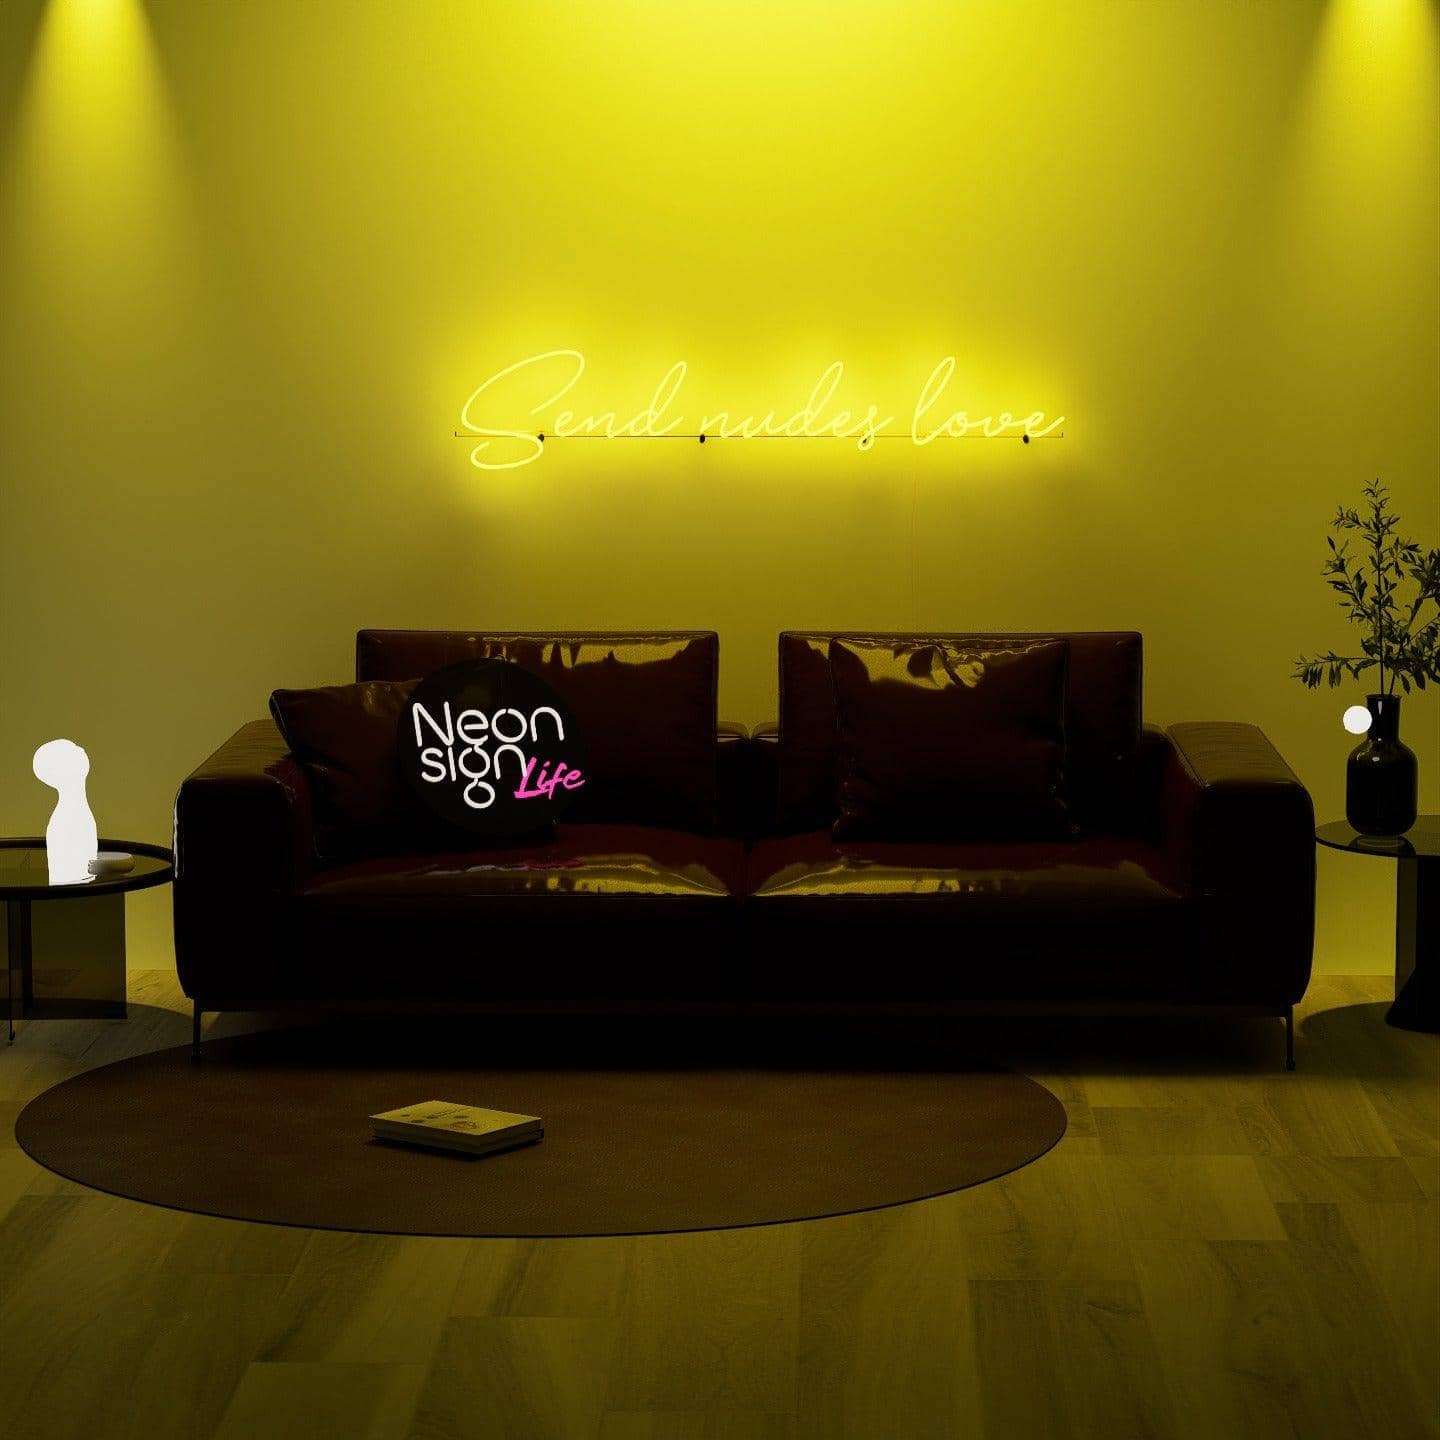 golden-neon-lights-illuminated-in-the-dark-and-hung-on-the-wall-for-display-send-nudes-love